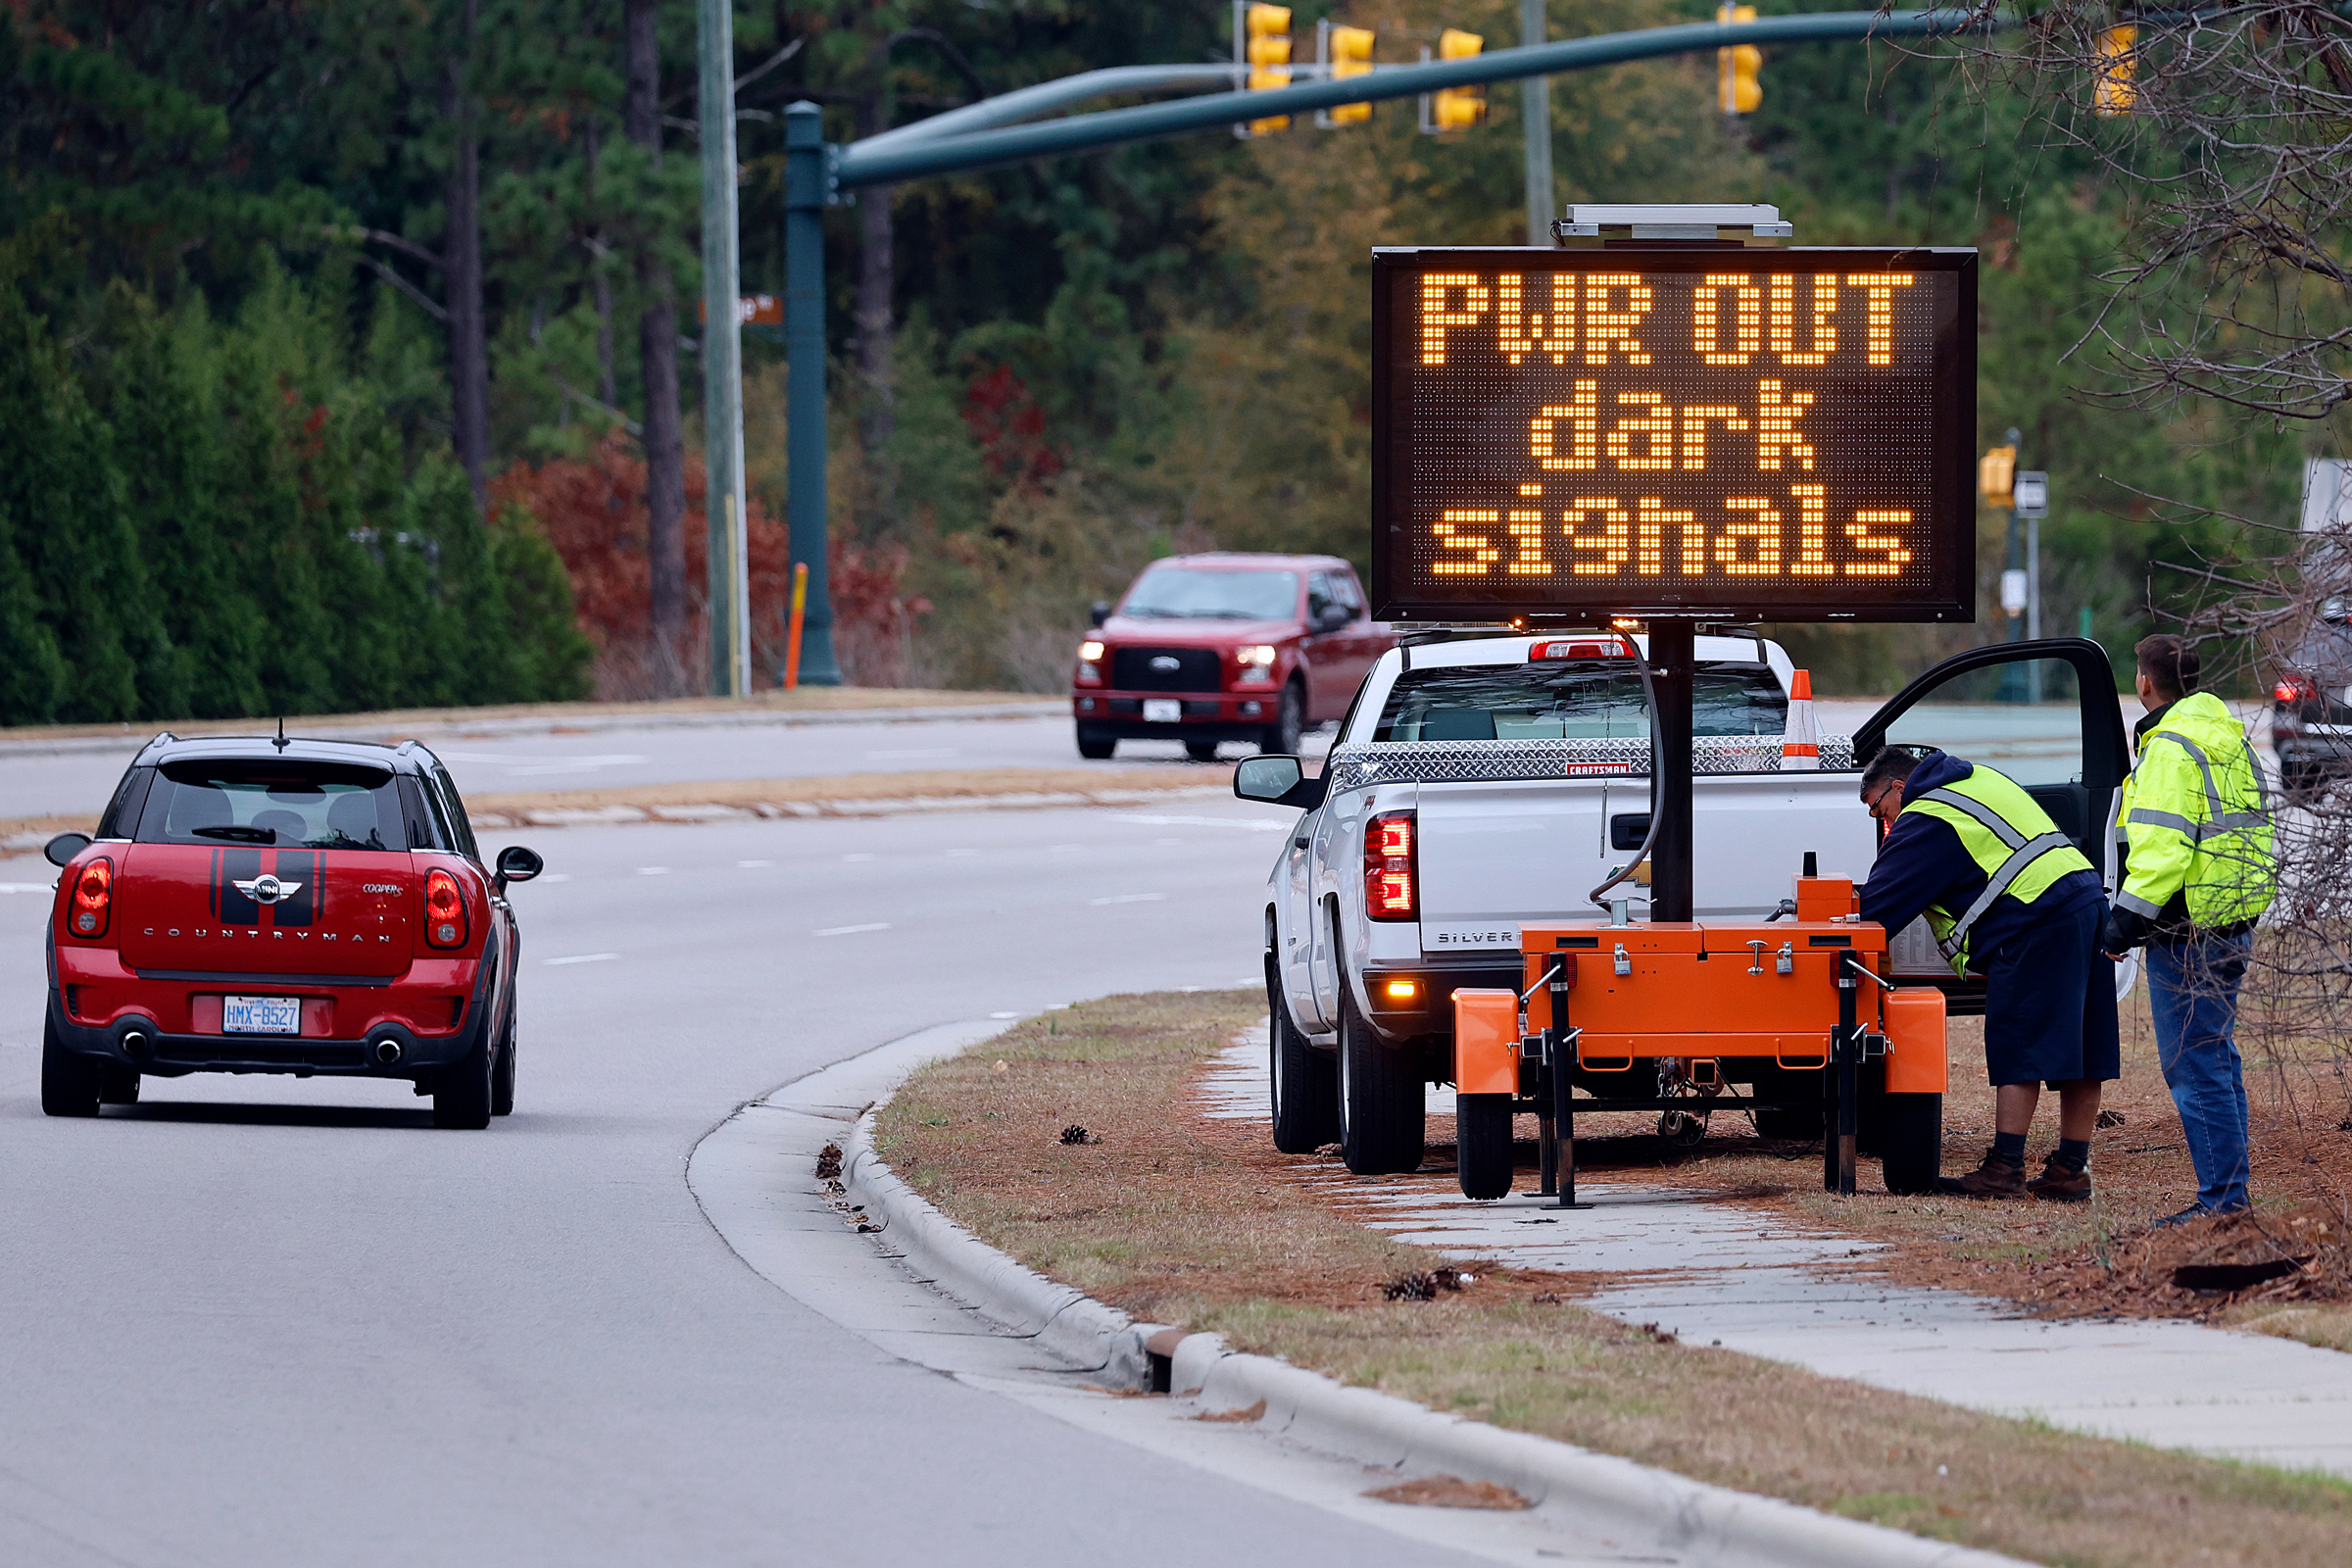 Workers set up an automated display warning drivers on NC211 of the power outage in the area and how to approach the upcoming intersections in Southern Pines, N.C., Monday, Dec. 5, 2022. (Karl B DeBlaker—AP)